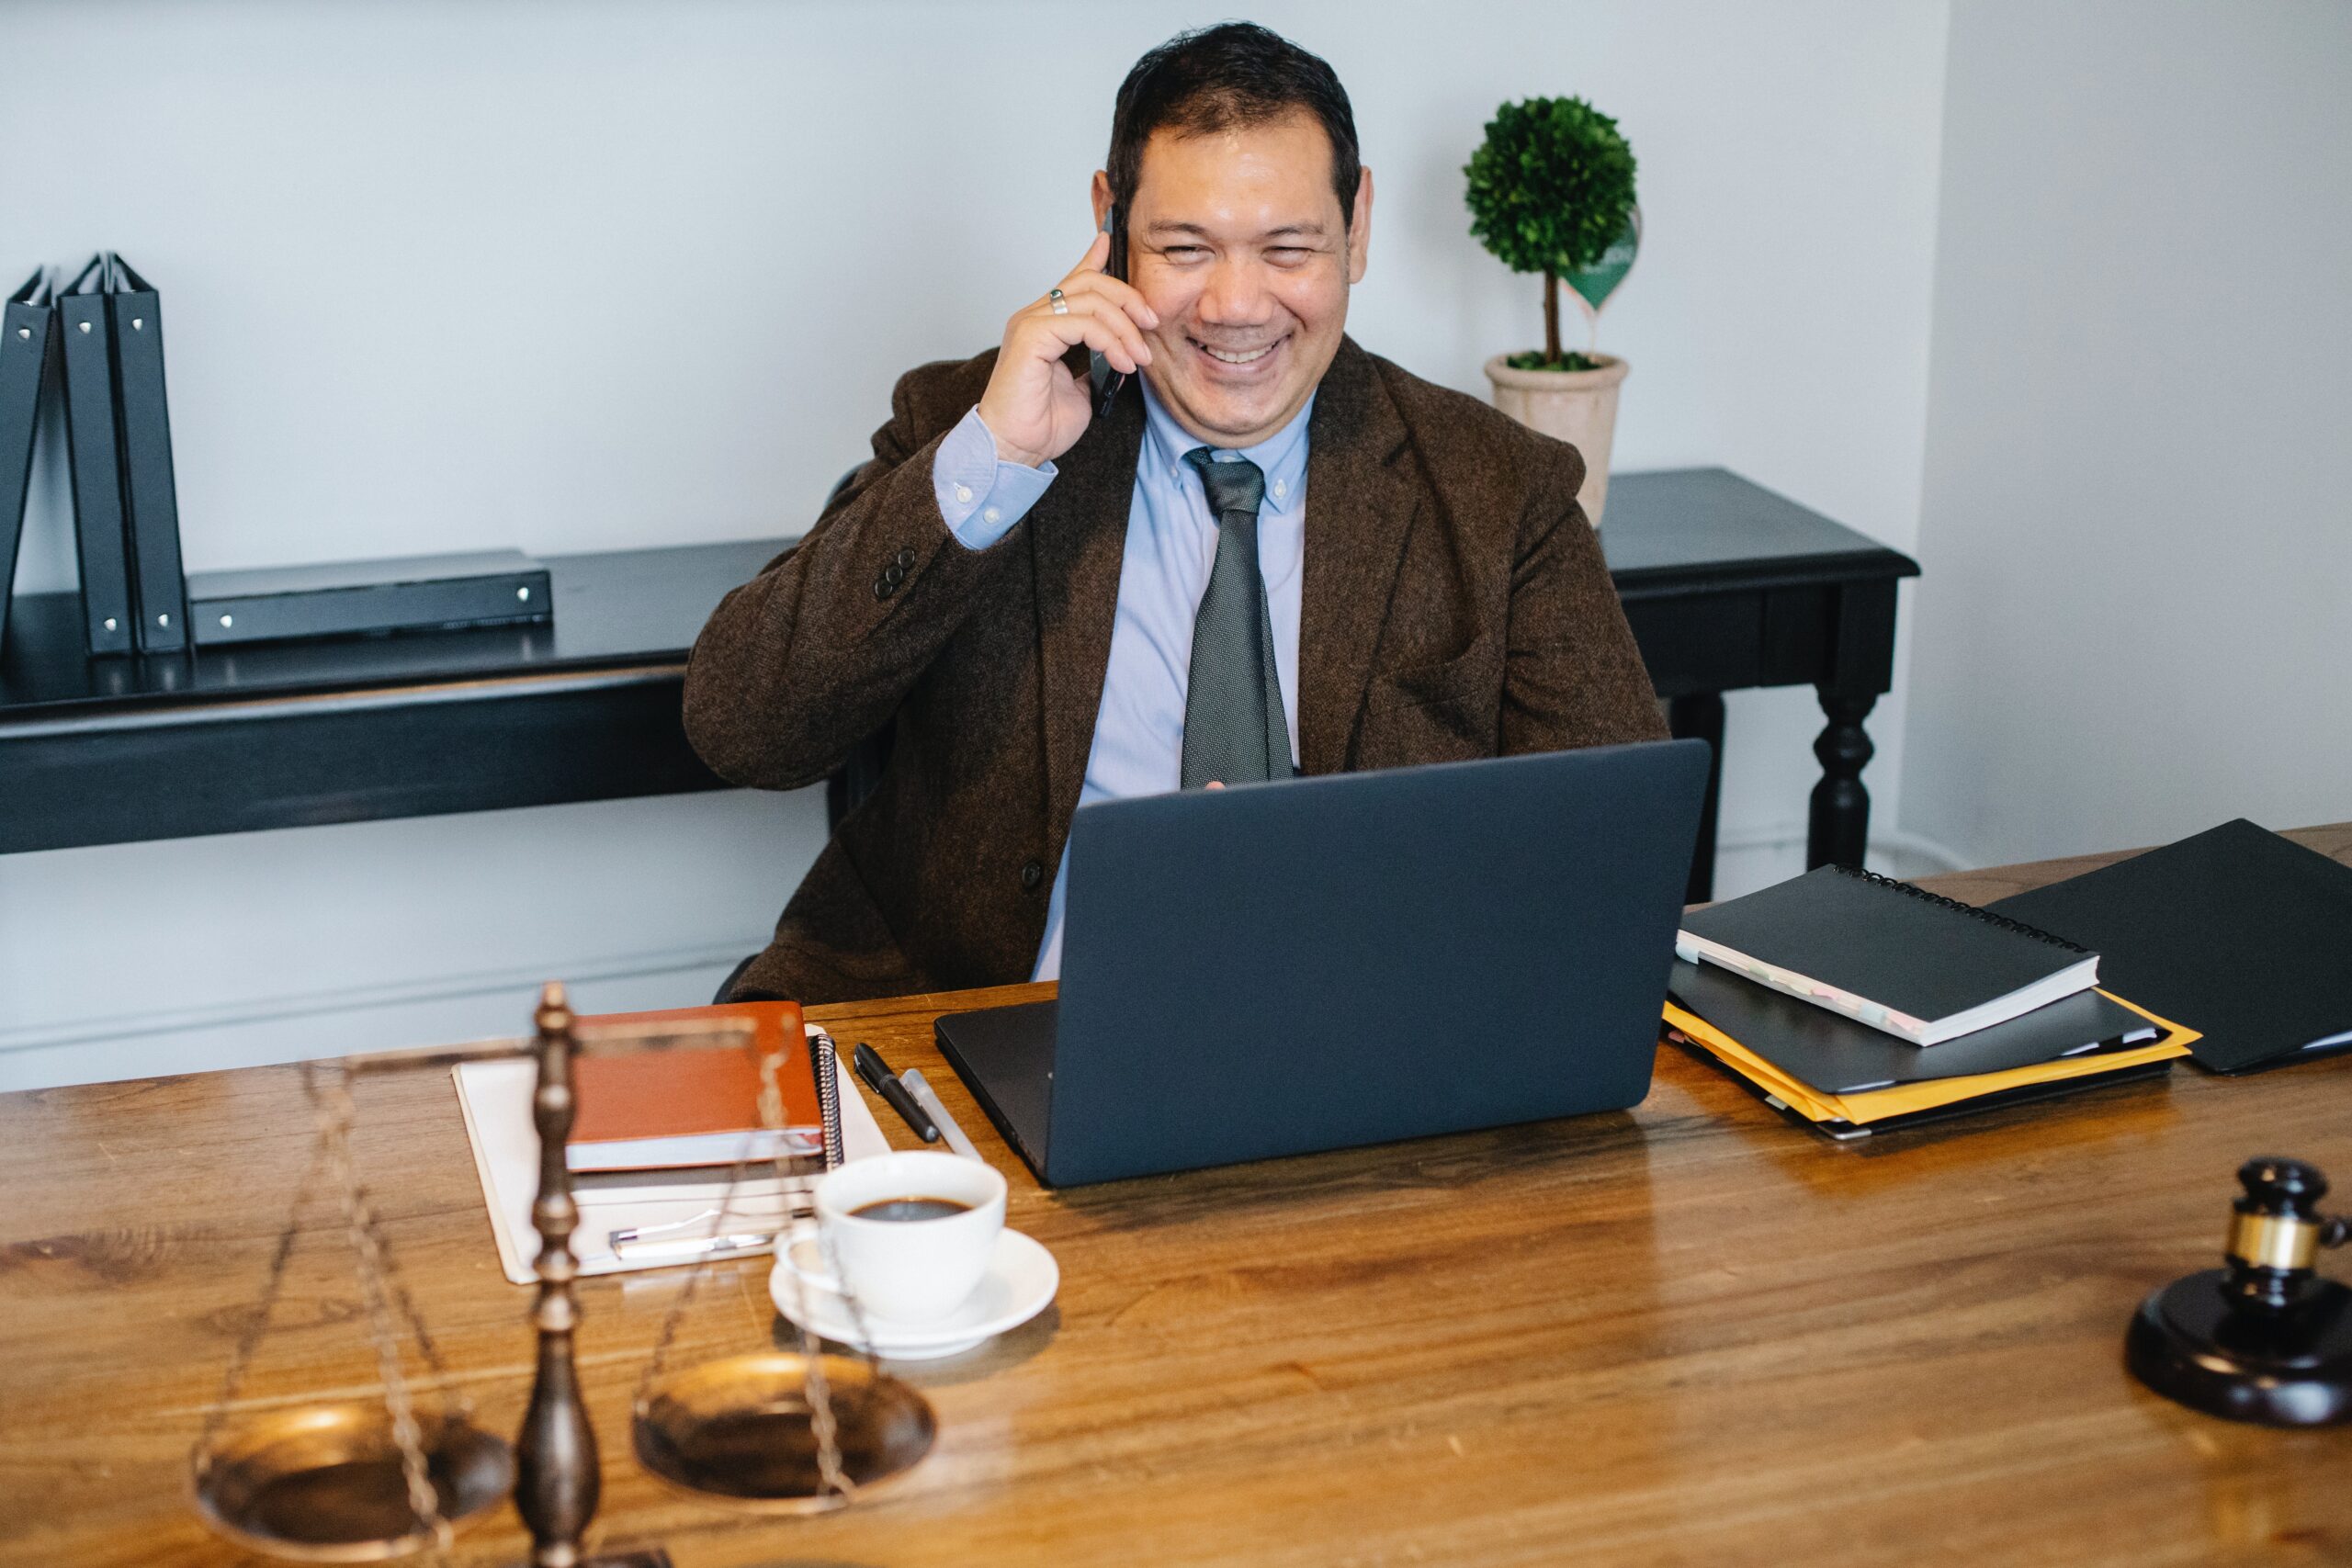 Man smiling while on sitting at desk and talking on the phone.